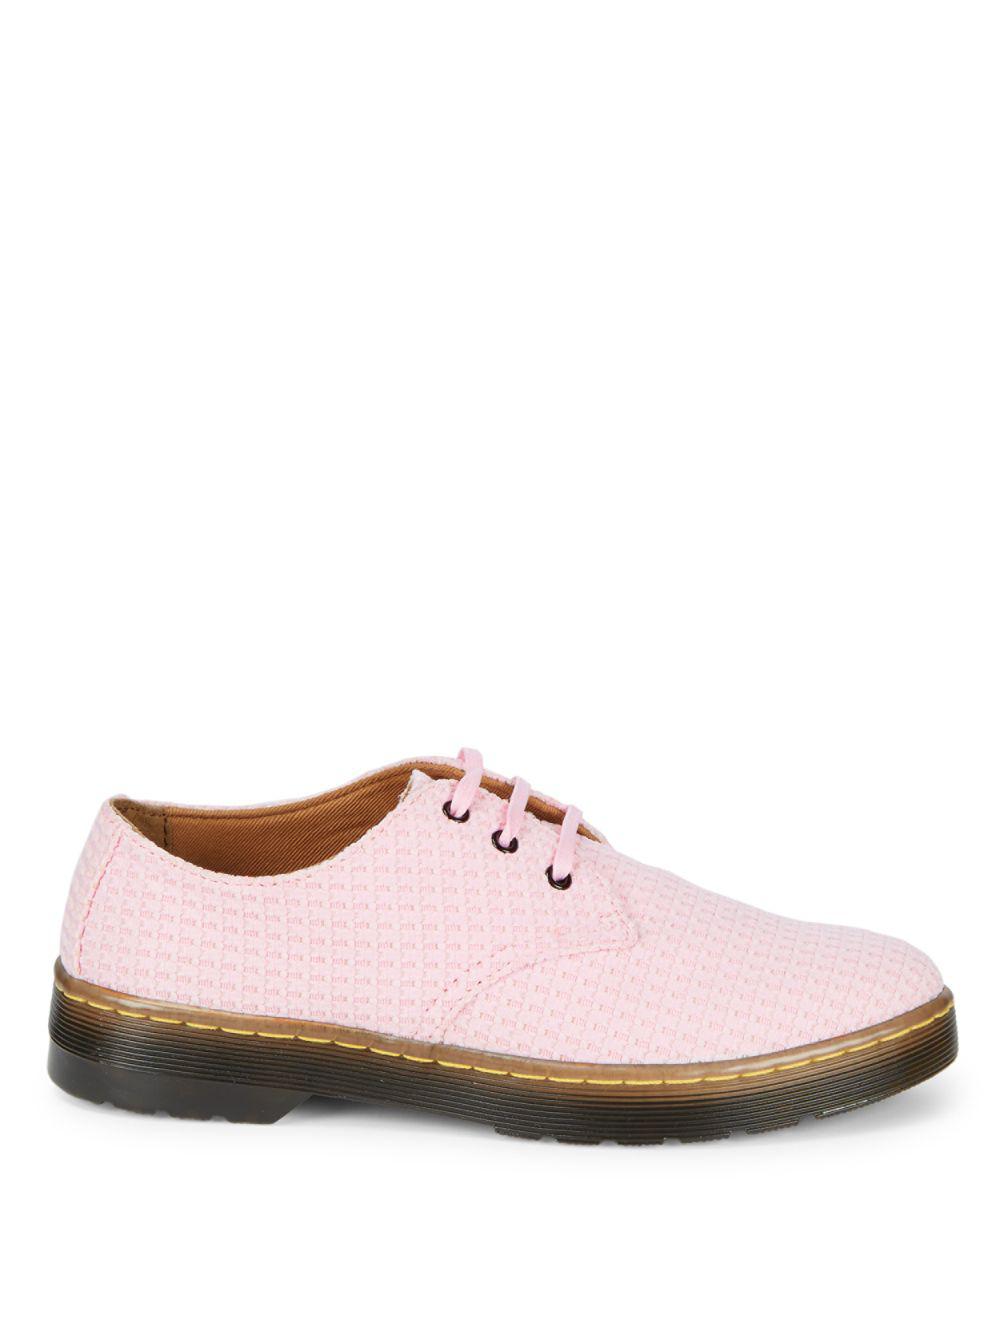 Dr. Martens Gizelle Lace-up Shoes in Pink | Lyst UK